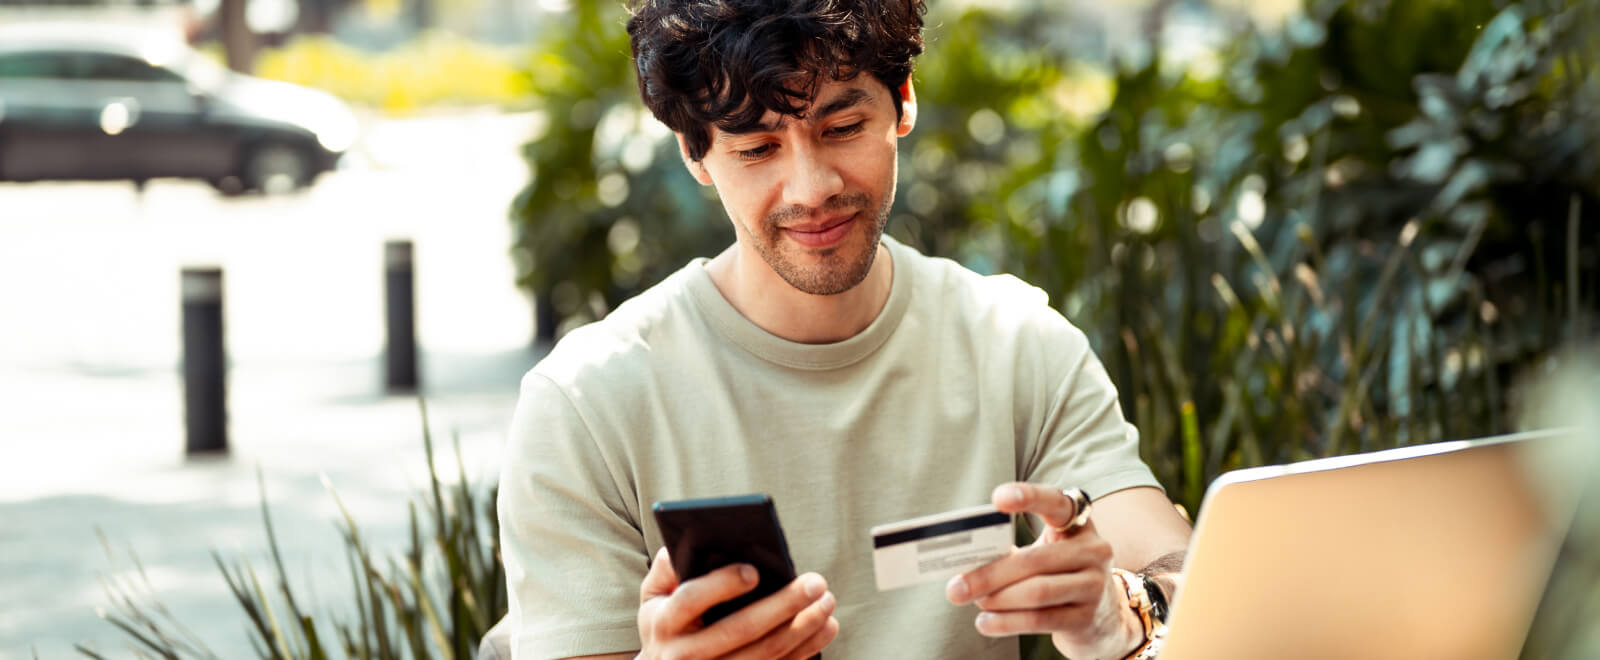 Young guy holding phone and credit card.